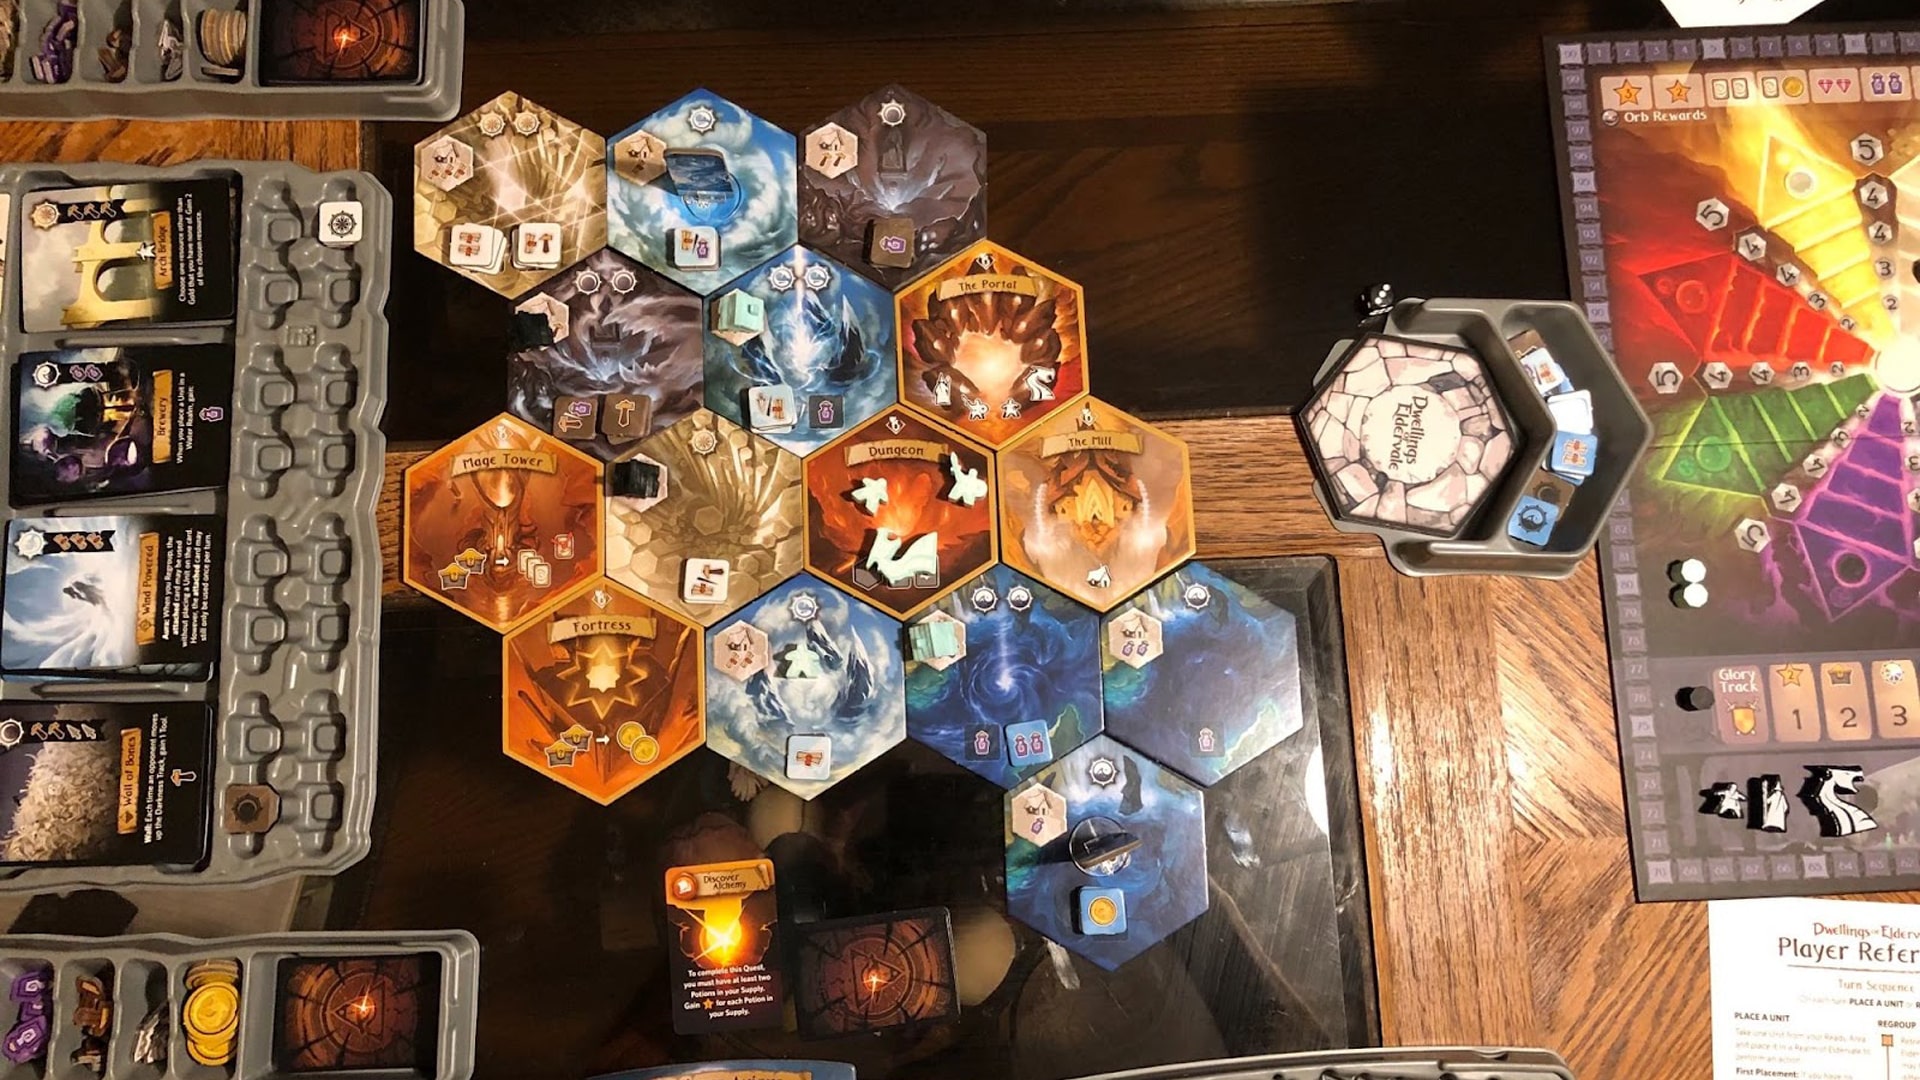 Gameplay layout of Dwellings of Eldervale, featuring colorful boards, cards, and fantasy-themed miniatures, highlighting the game's immersive world-building.